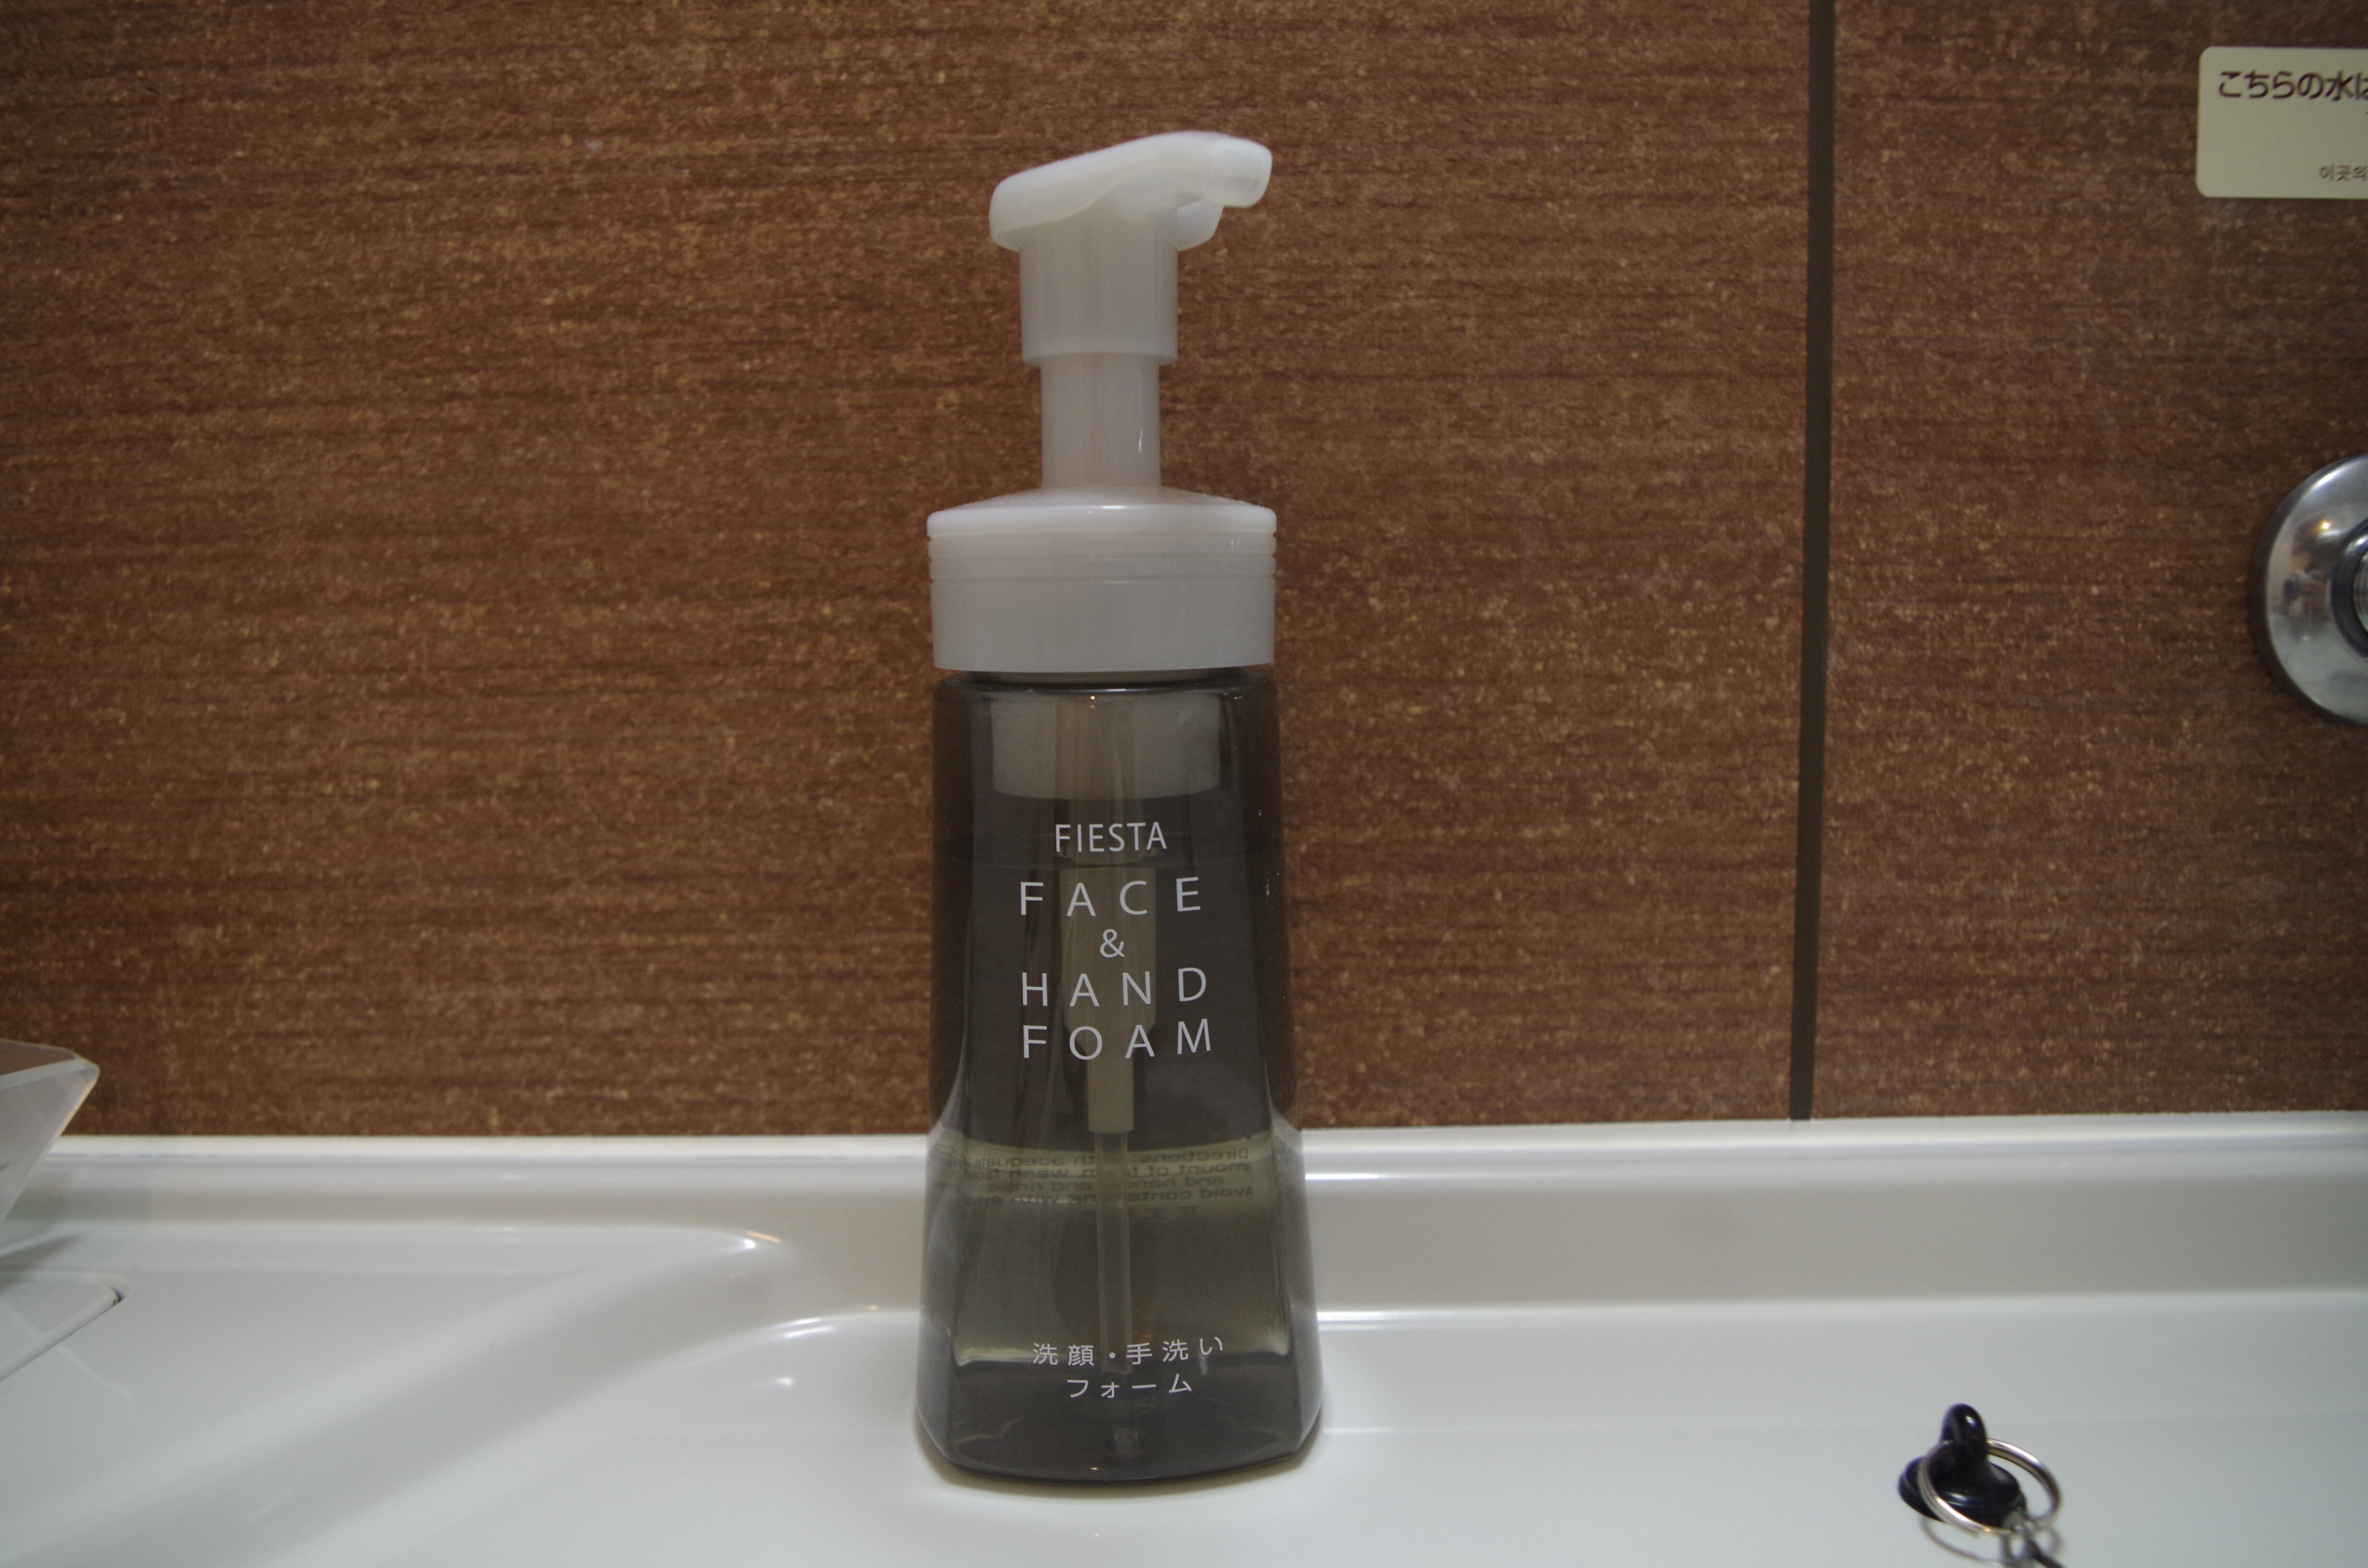 Face wash / hand soap